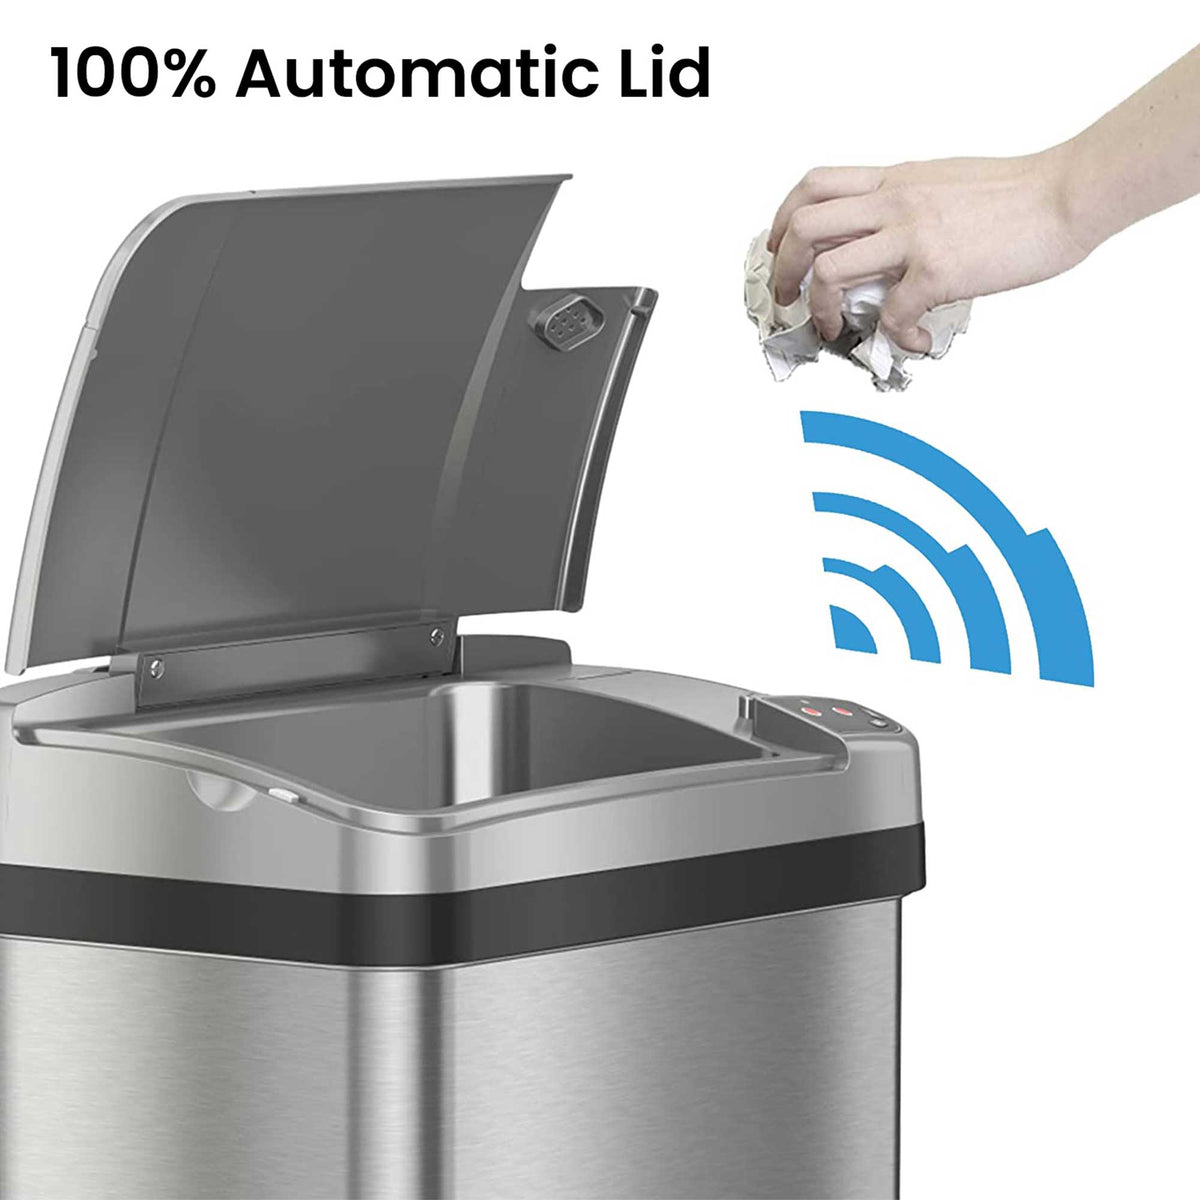 iTouchless 2.5 Gallon / 9.5 Liter Stainless Steel Sensor Bathroom Trash Can with Odor Filter and Lemon Fragrance 100% Automatic Lid